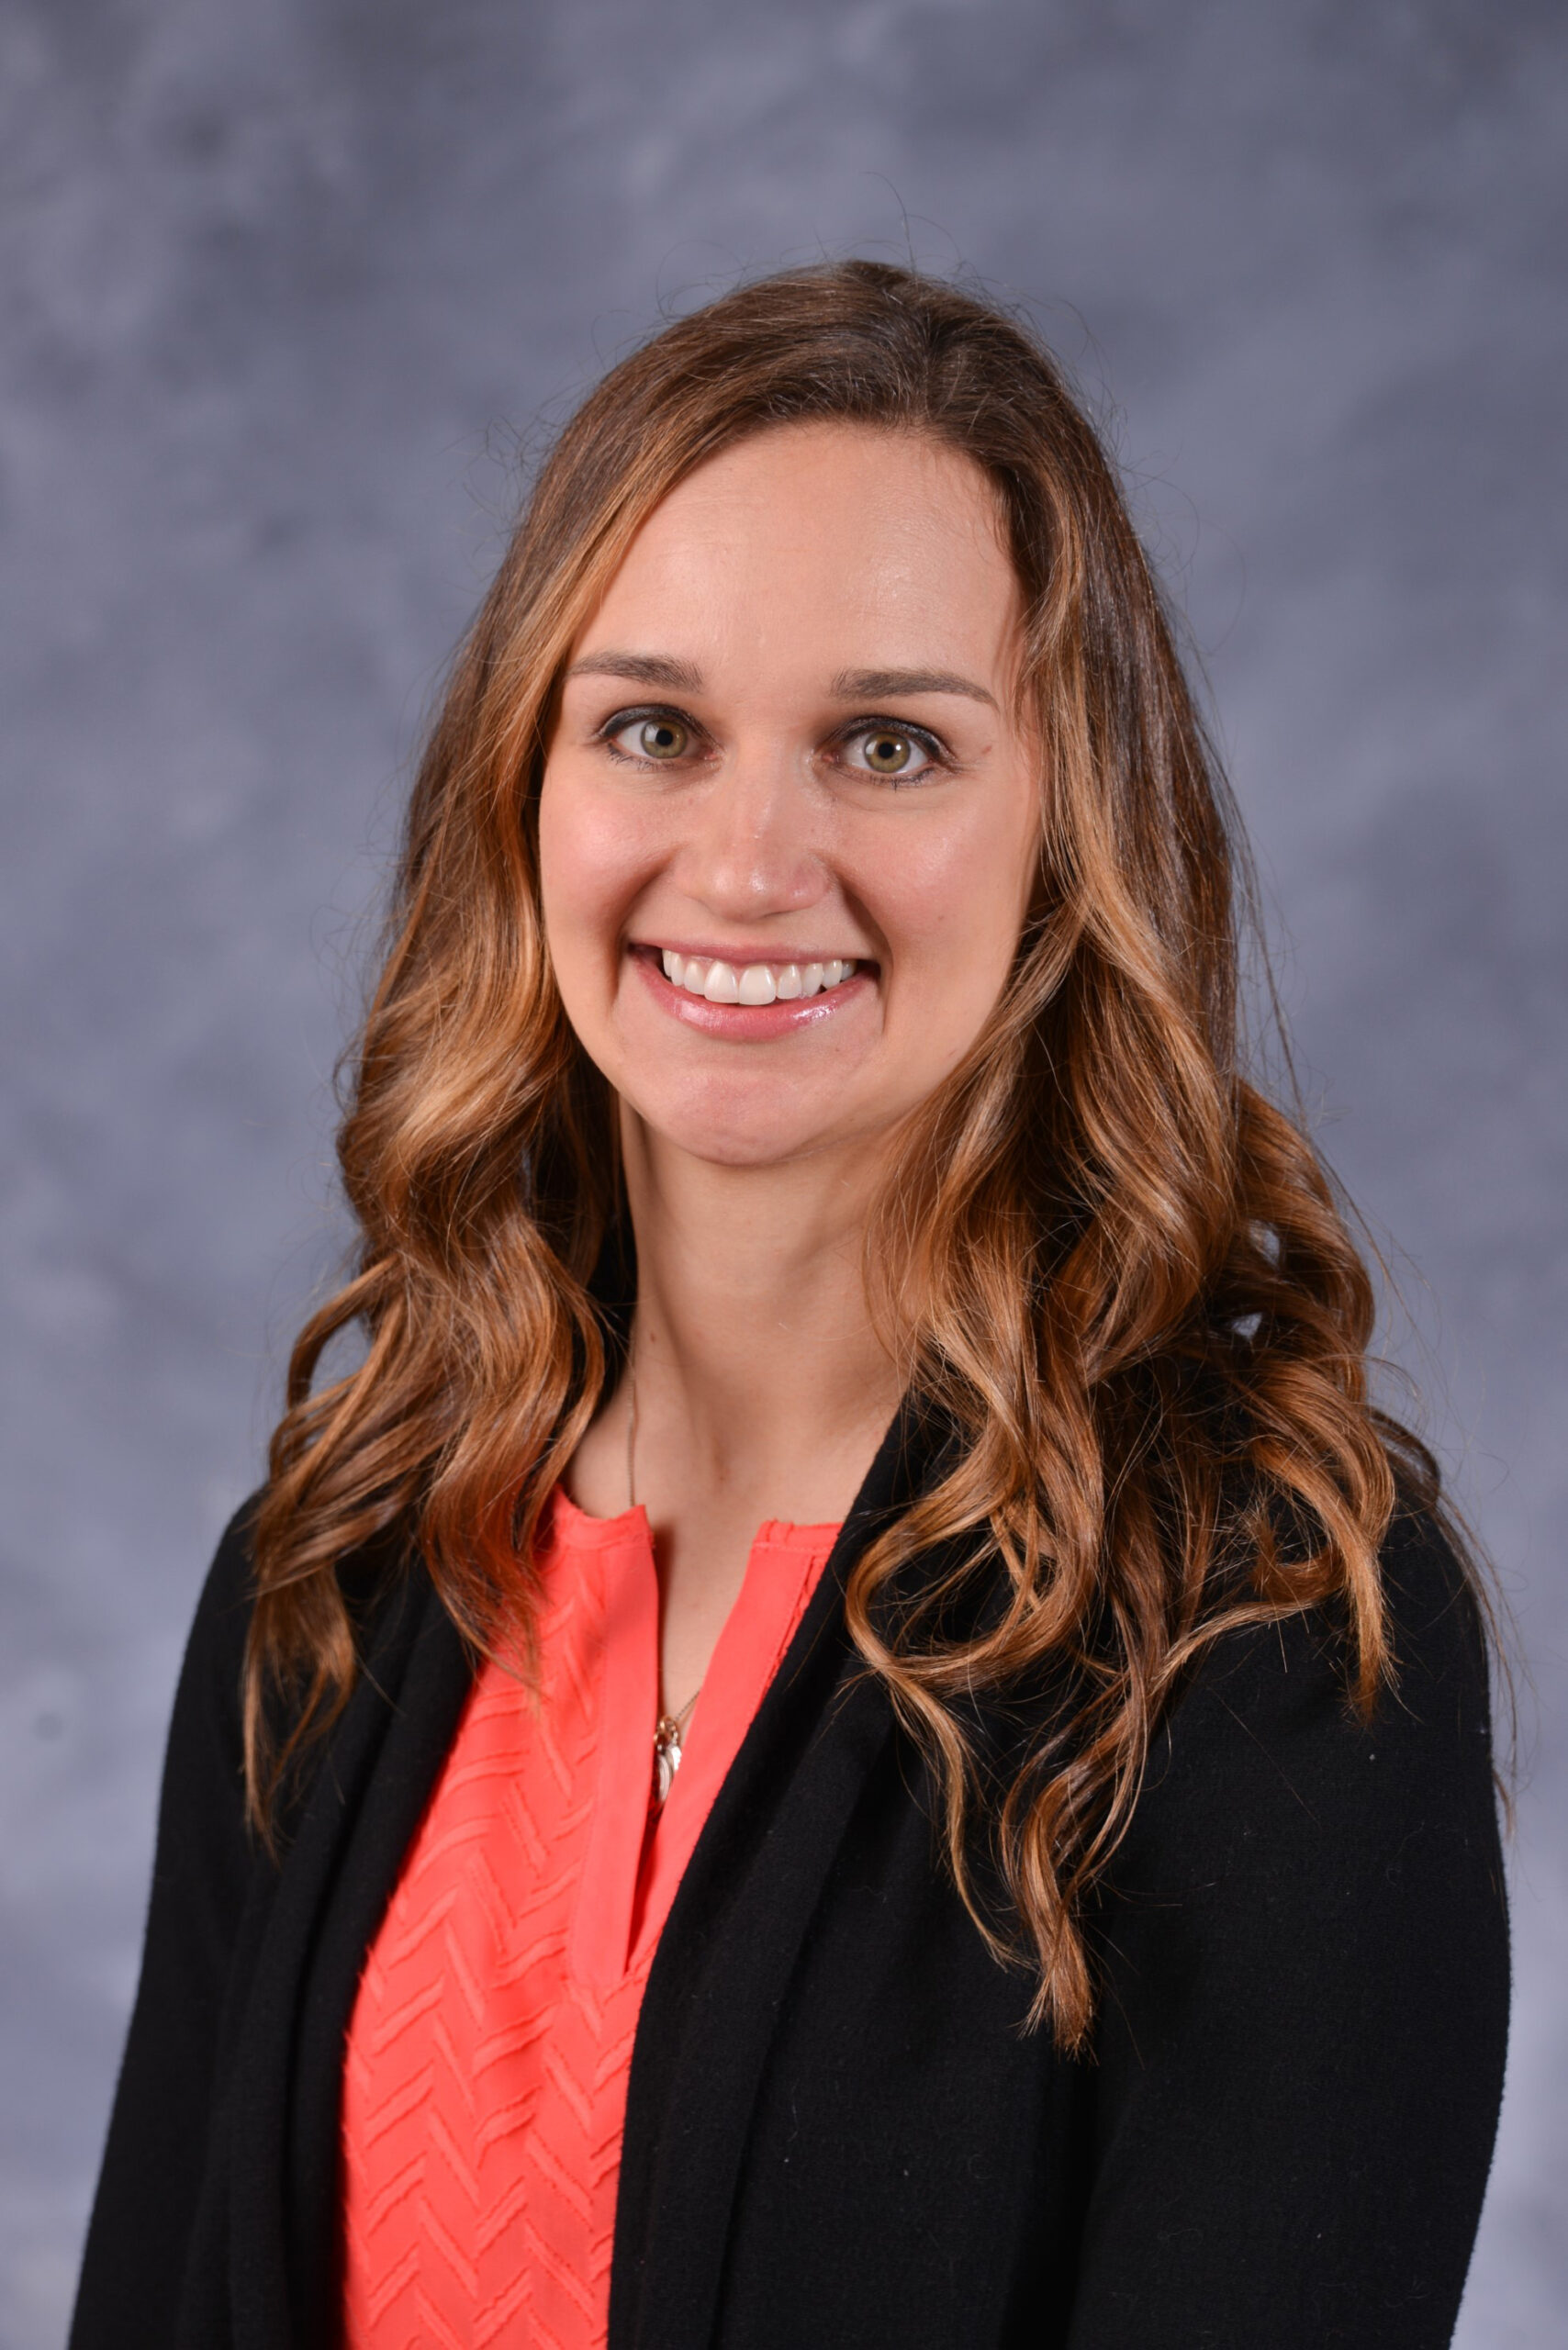 Lindsay Dexter - Physical Therapy-Pediatric provider at Children's Health Center